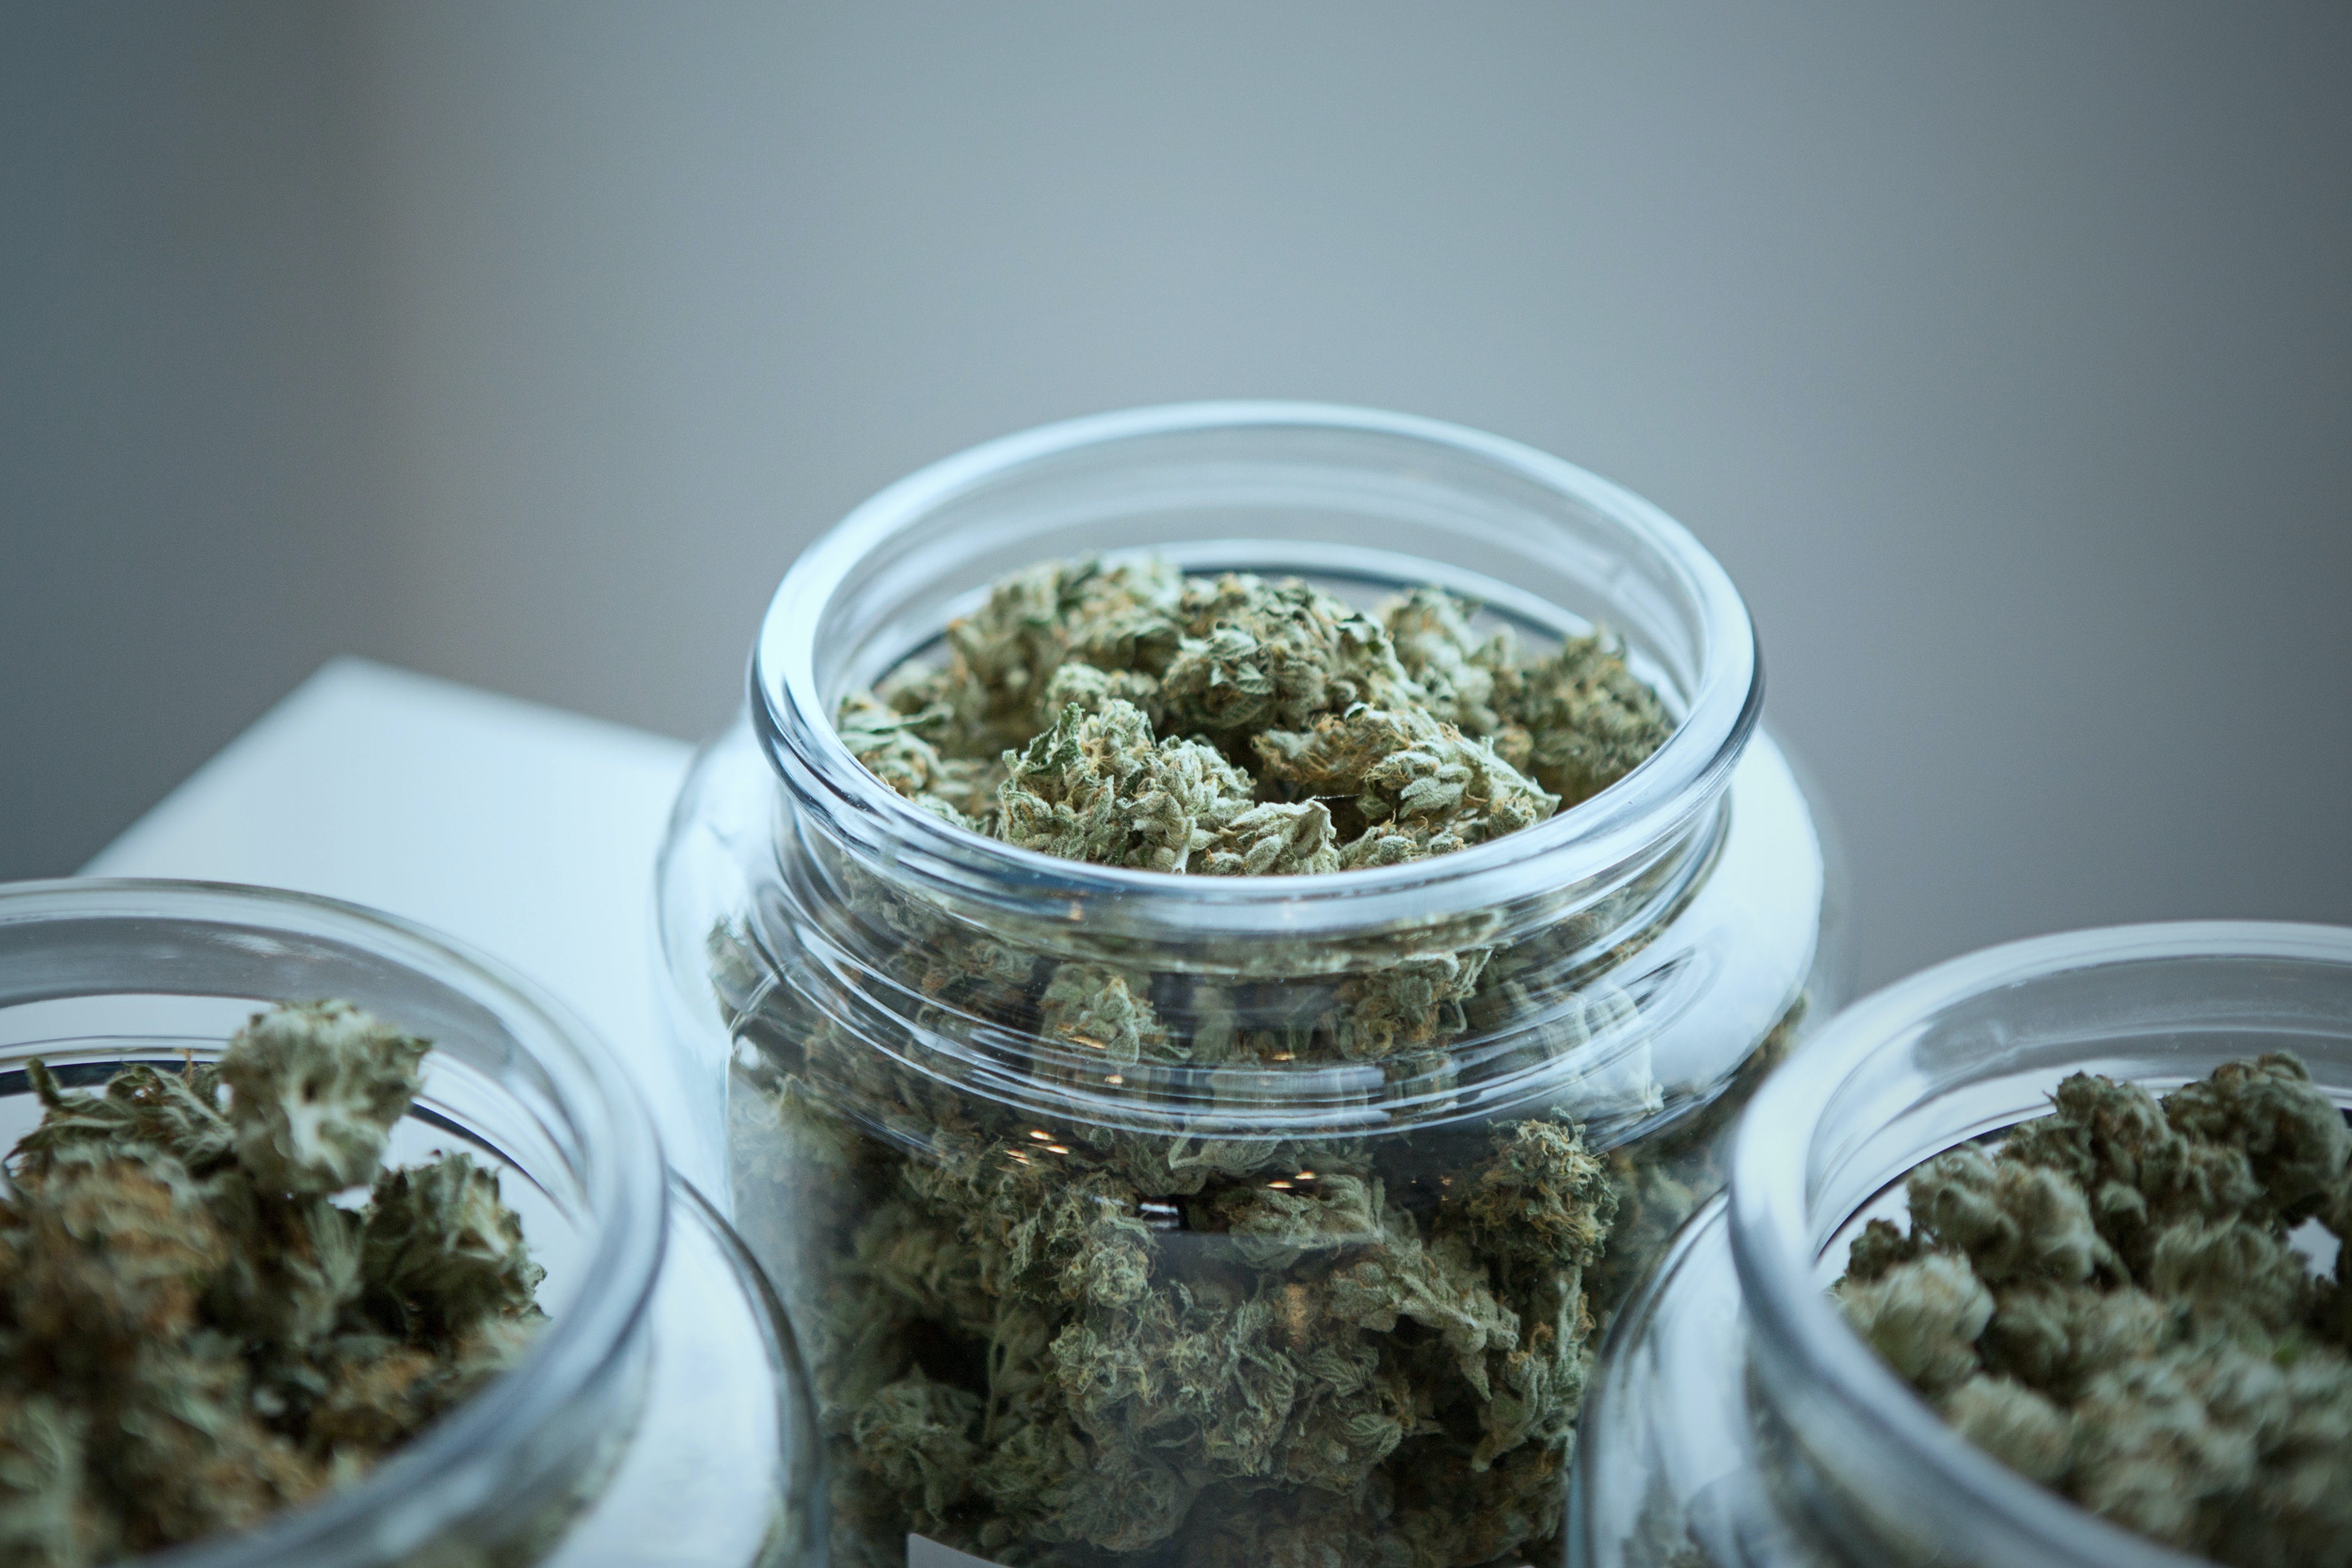 Three large glass jars filled with premium cannabis flower are placed on a table.